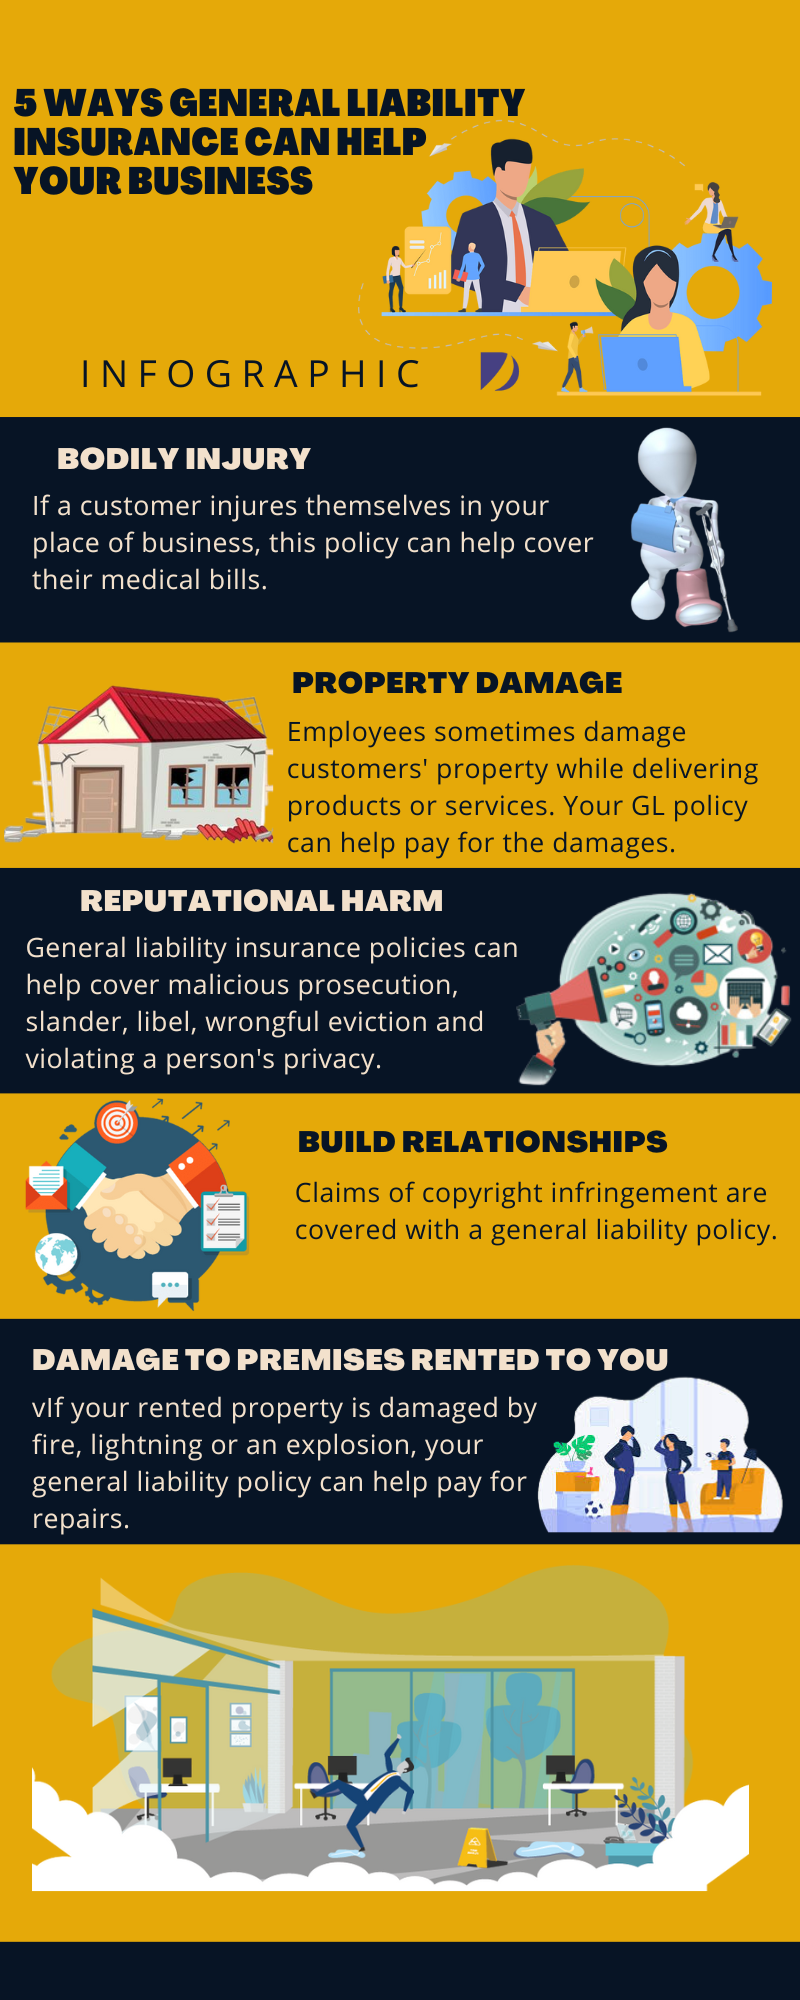 5 Ways General Liability Insurance Can Help Your Business Infographic 